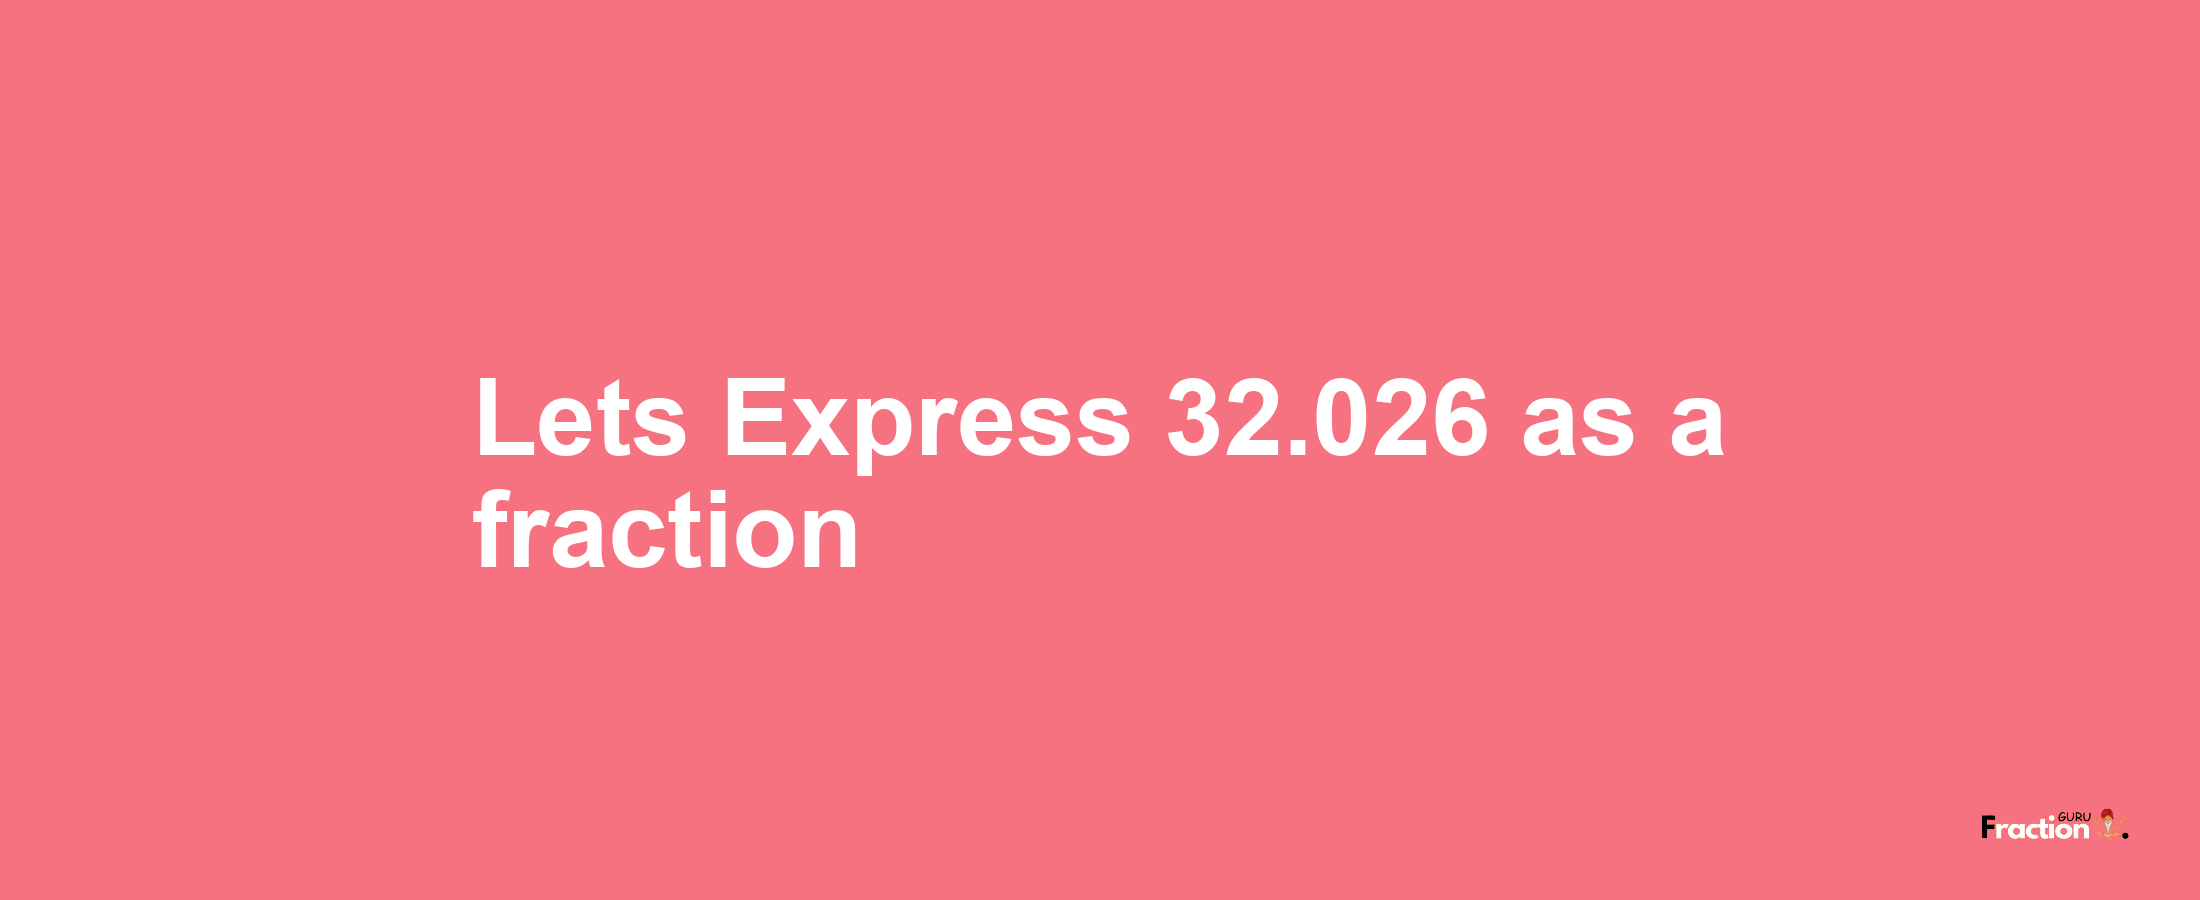 Lets Express 32.026 as afraction